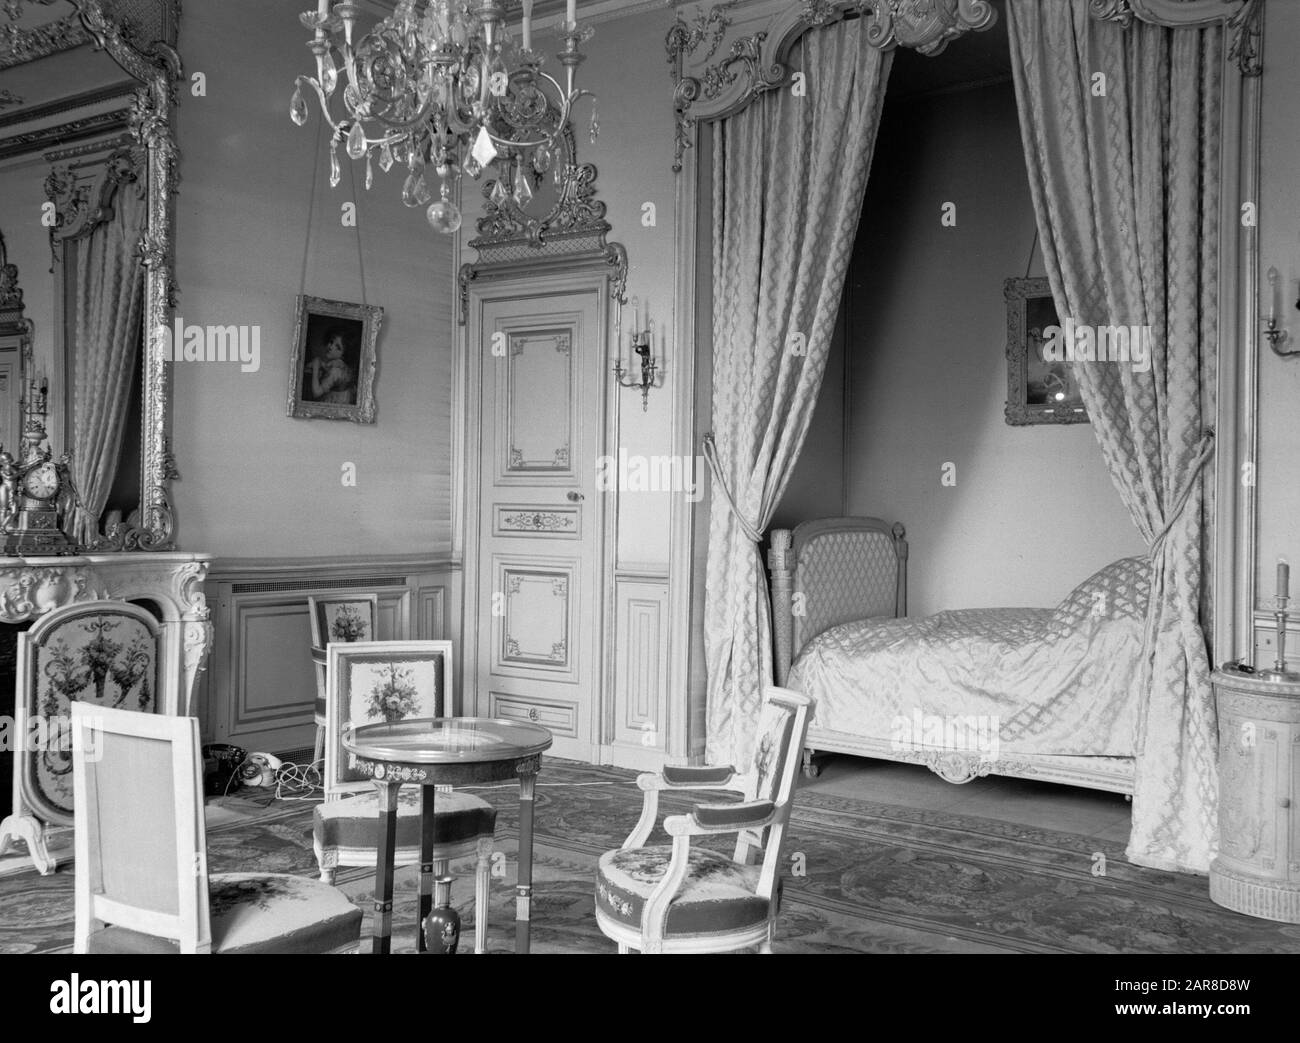 Bedroom in a palace (Elysée in Paris?) Date: 1938 Location: France, Paris Keywords: beds, interior, palaces, bedrooms, mirrors, chairs, tables Institution name: Palais d'Orsay Stock Photo